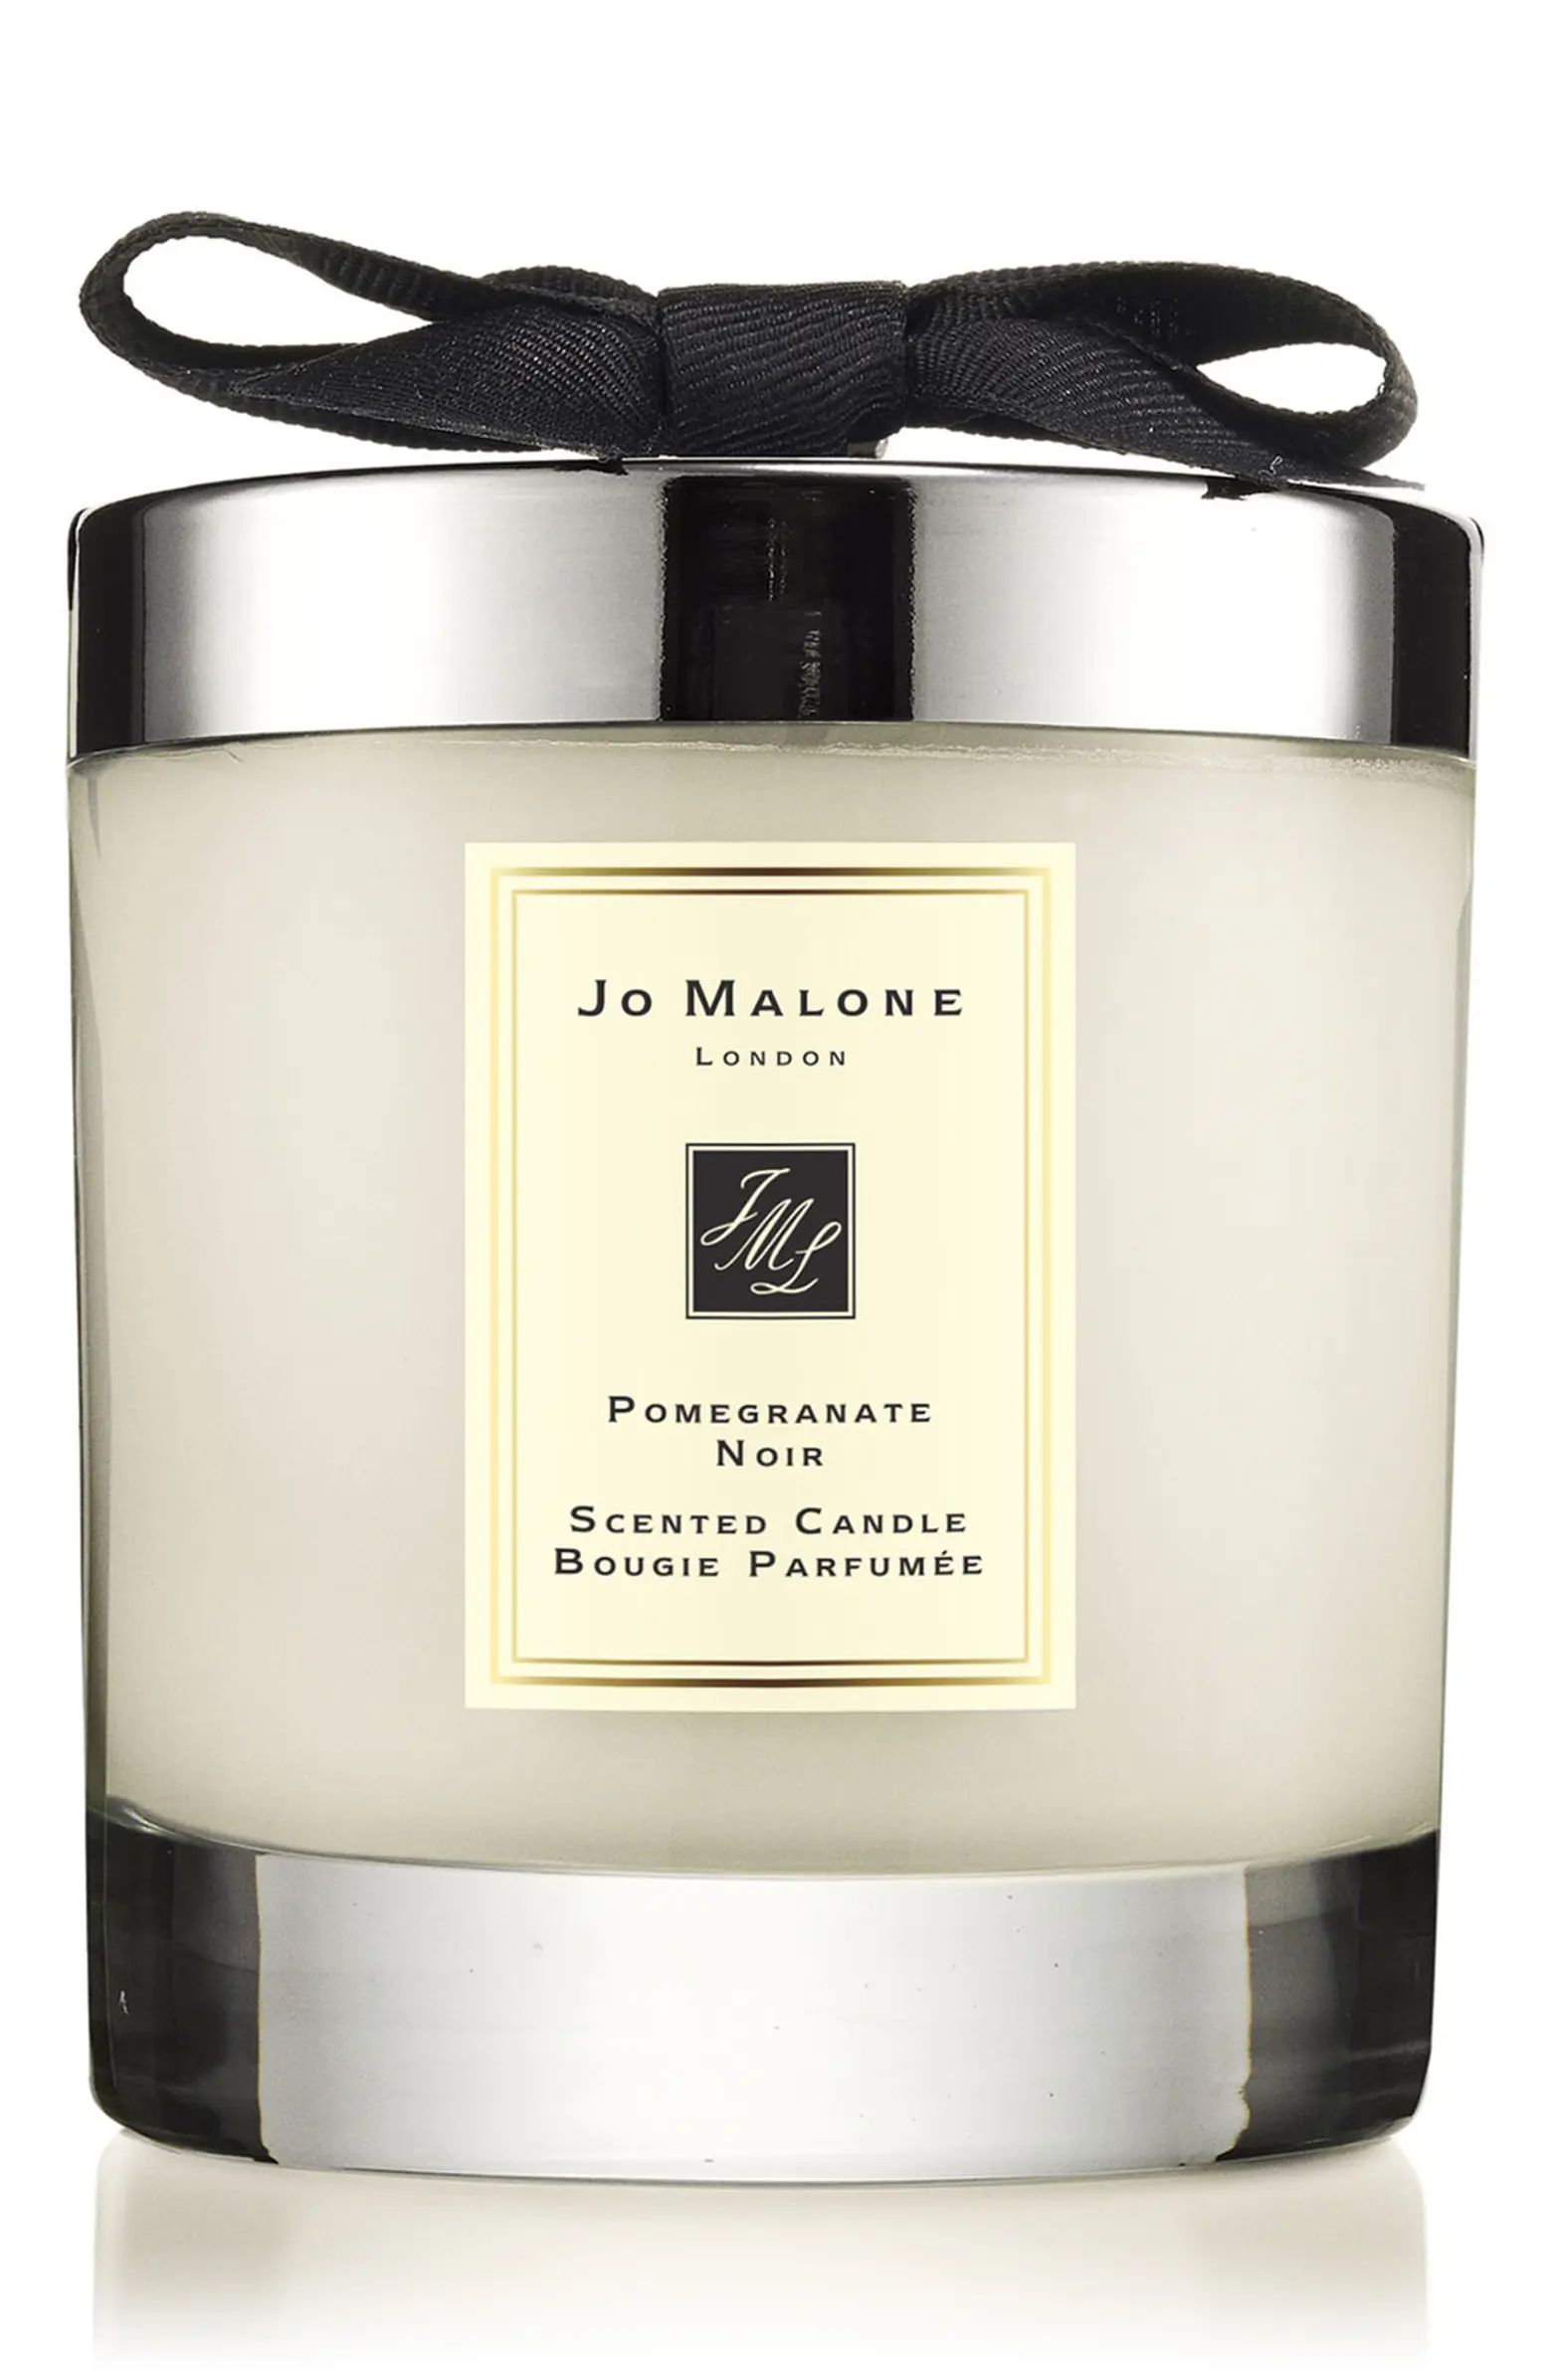 Pomegranate Noir Scented Home Candle | Nordstrom